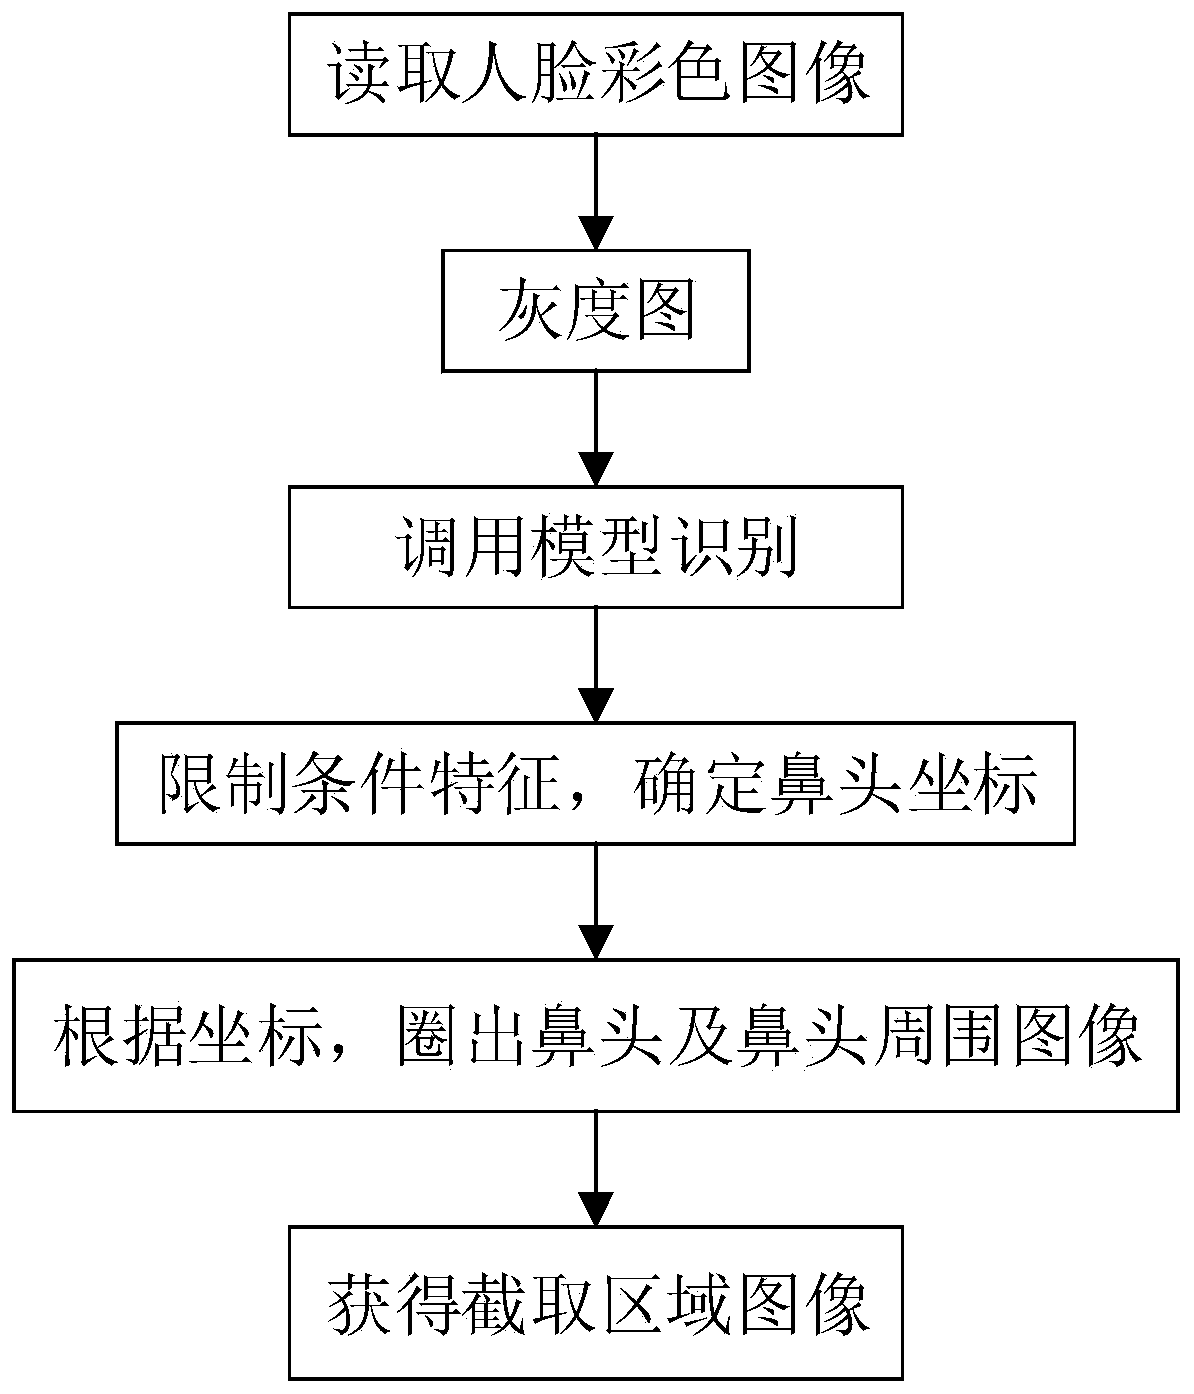 Blackhead recognition processing method and system